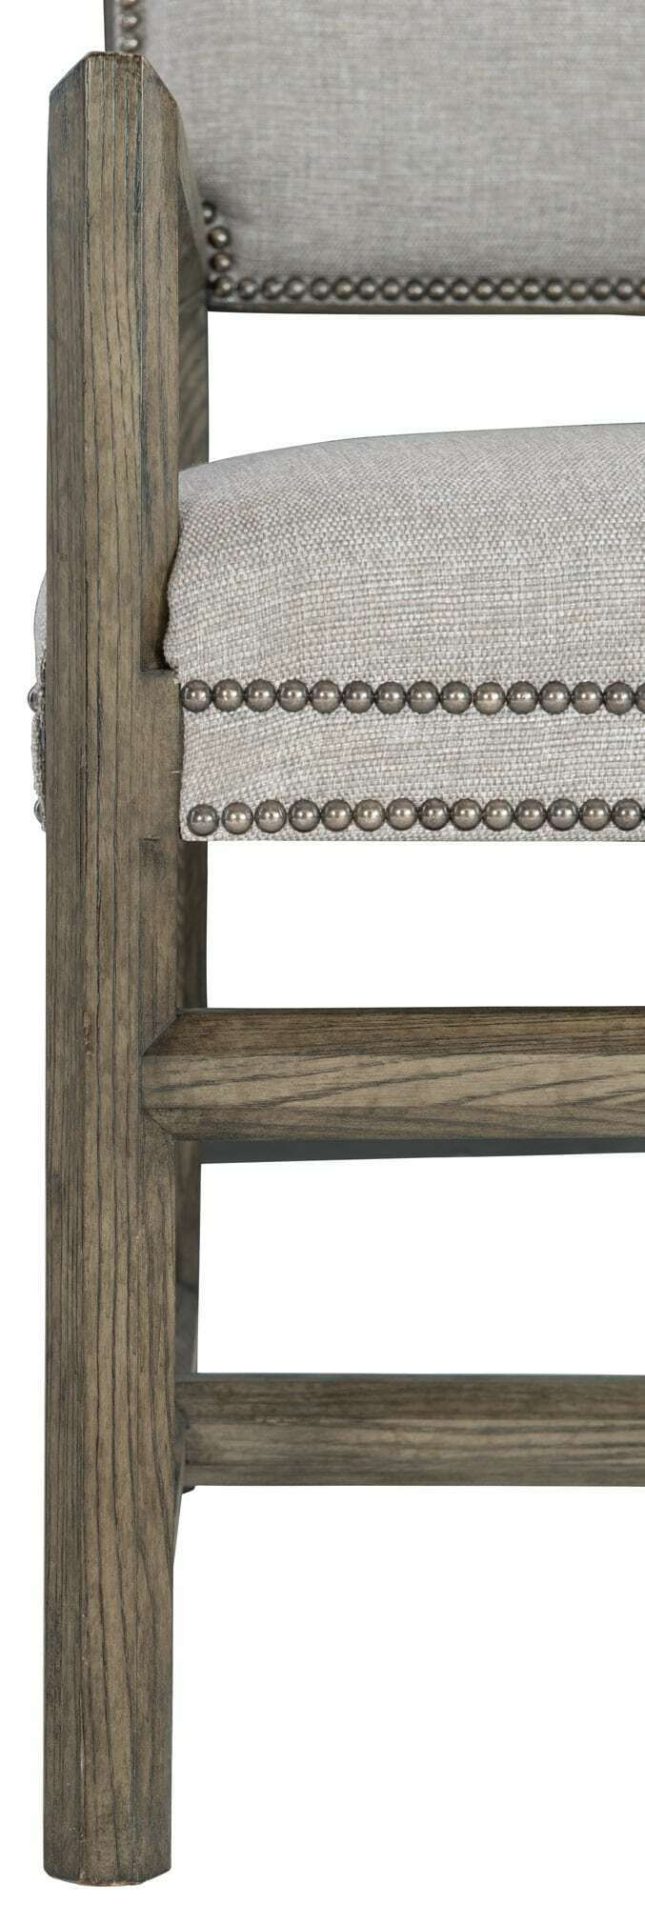 Canyon Ridge Arm Dining Chair Details